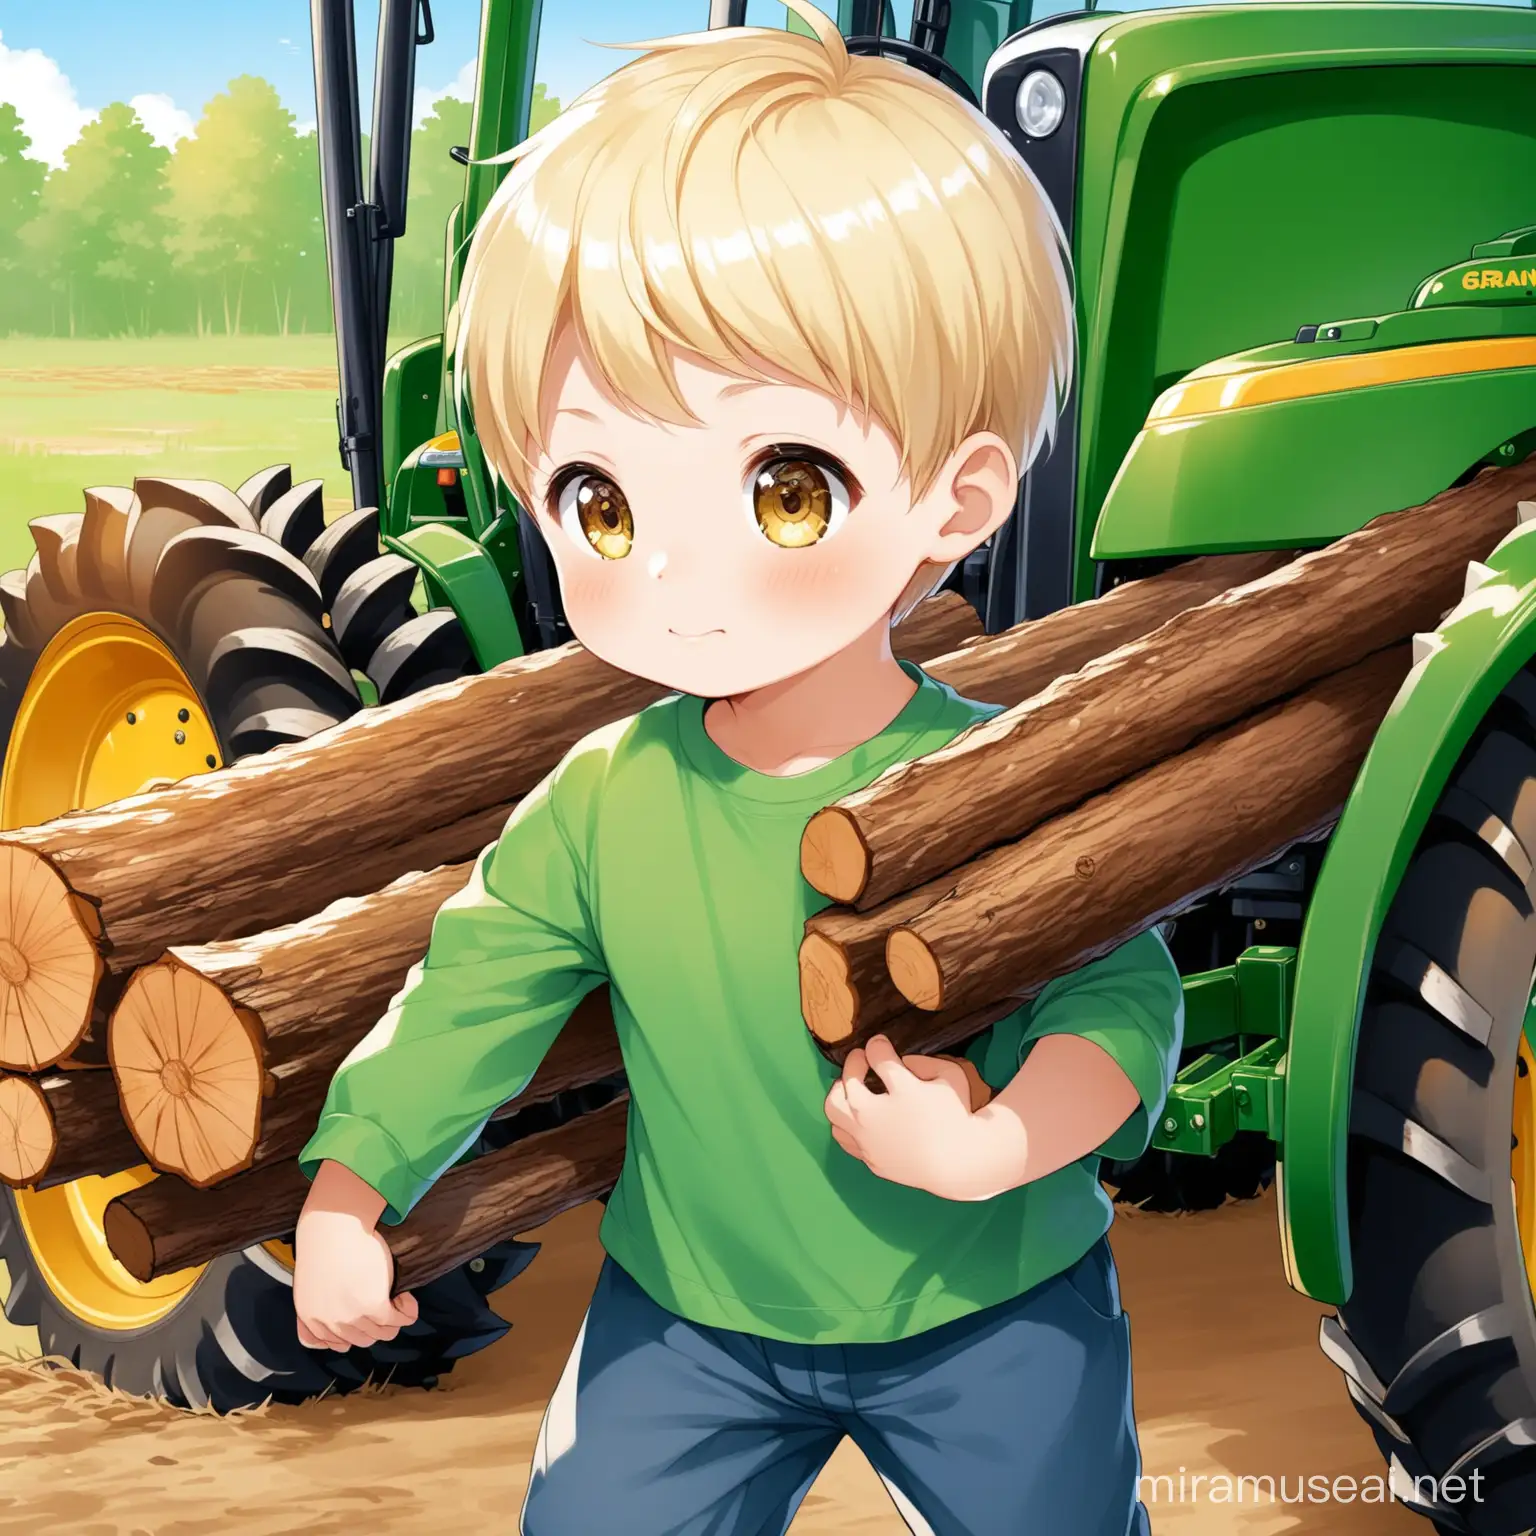 Young Boy Assisting Grandpa with Firewood from Green Tractor Loader